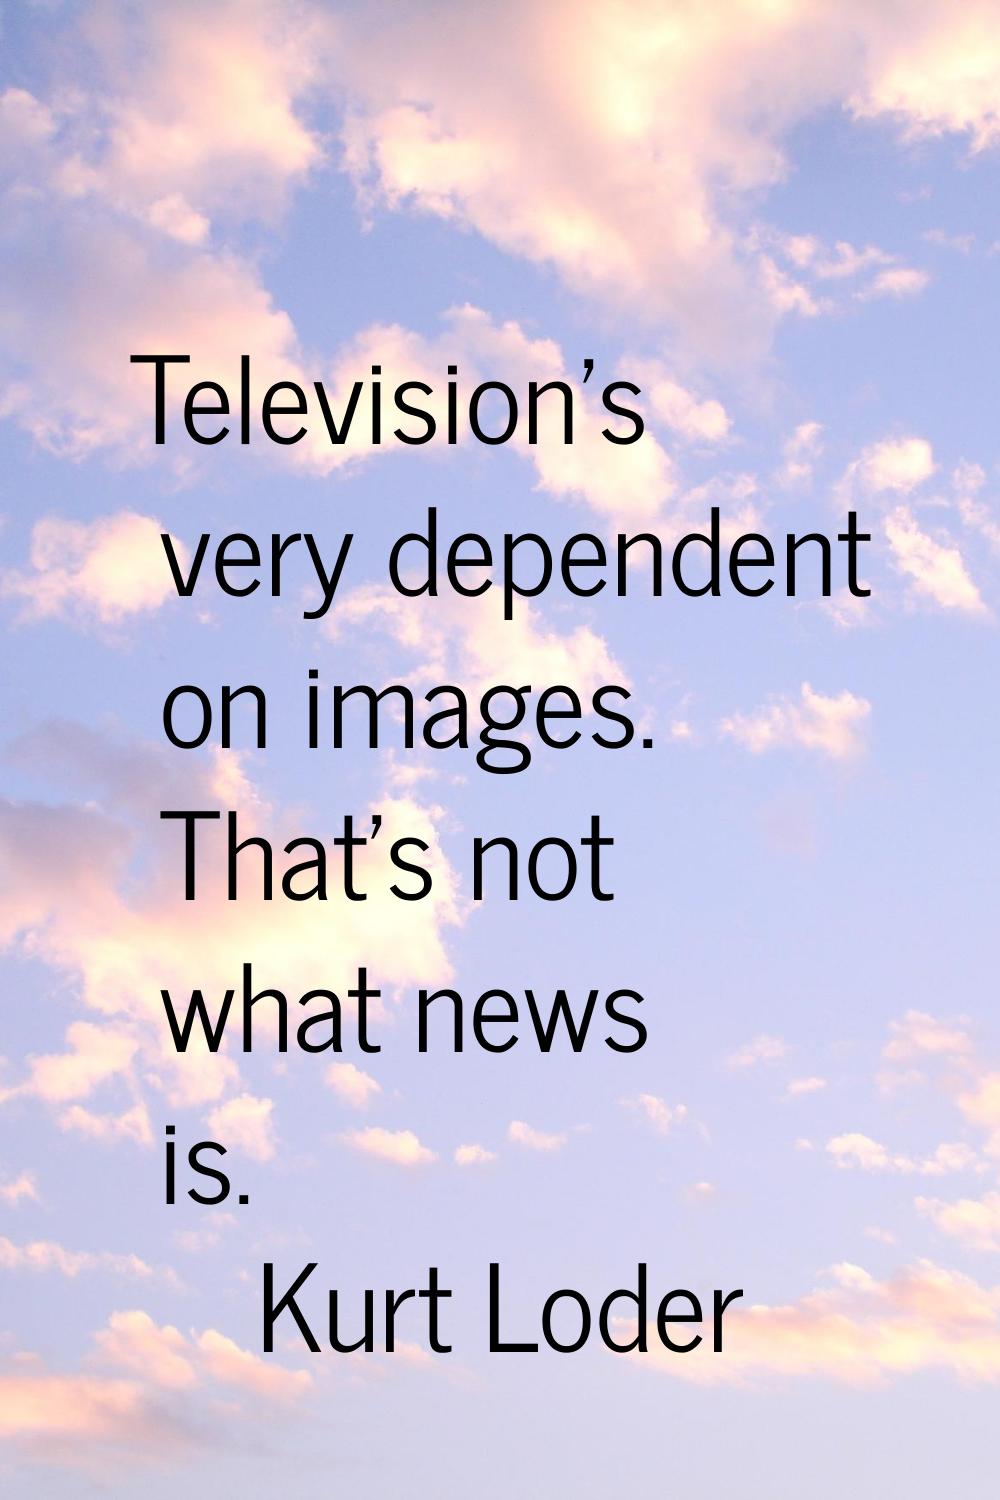 Television's very dependent on images. That's not what news is.